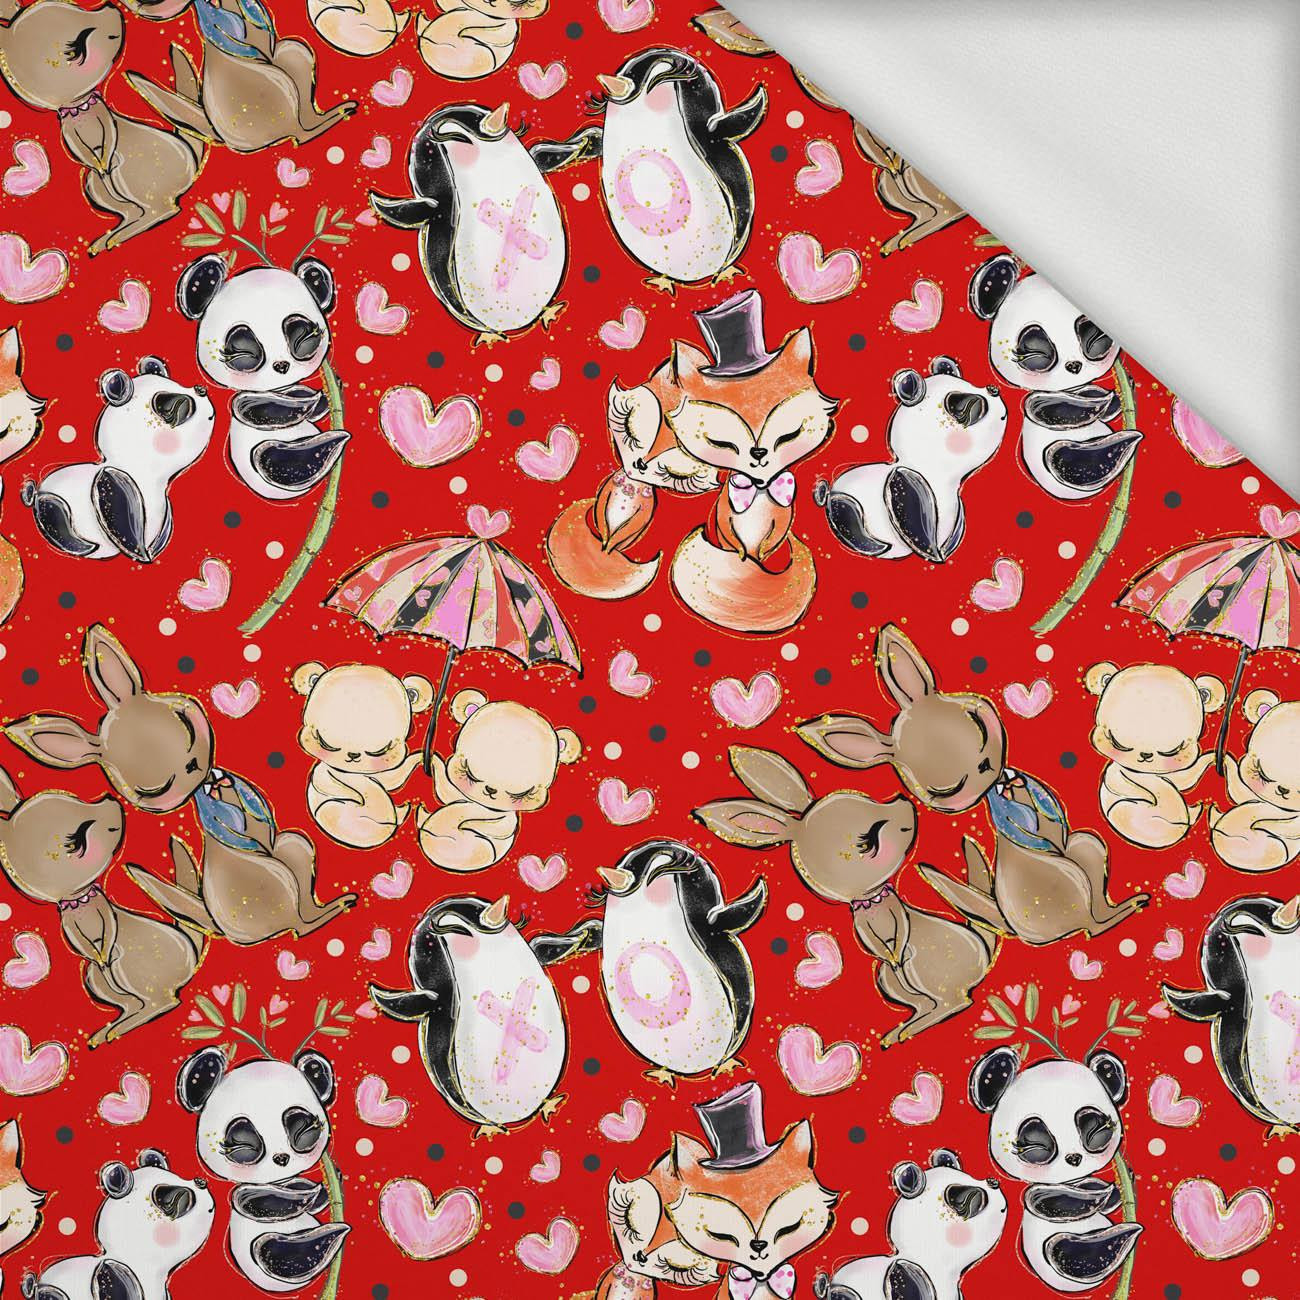 LITTLE ANIMALS IN LOVE pat. 2 - looped knit fabric